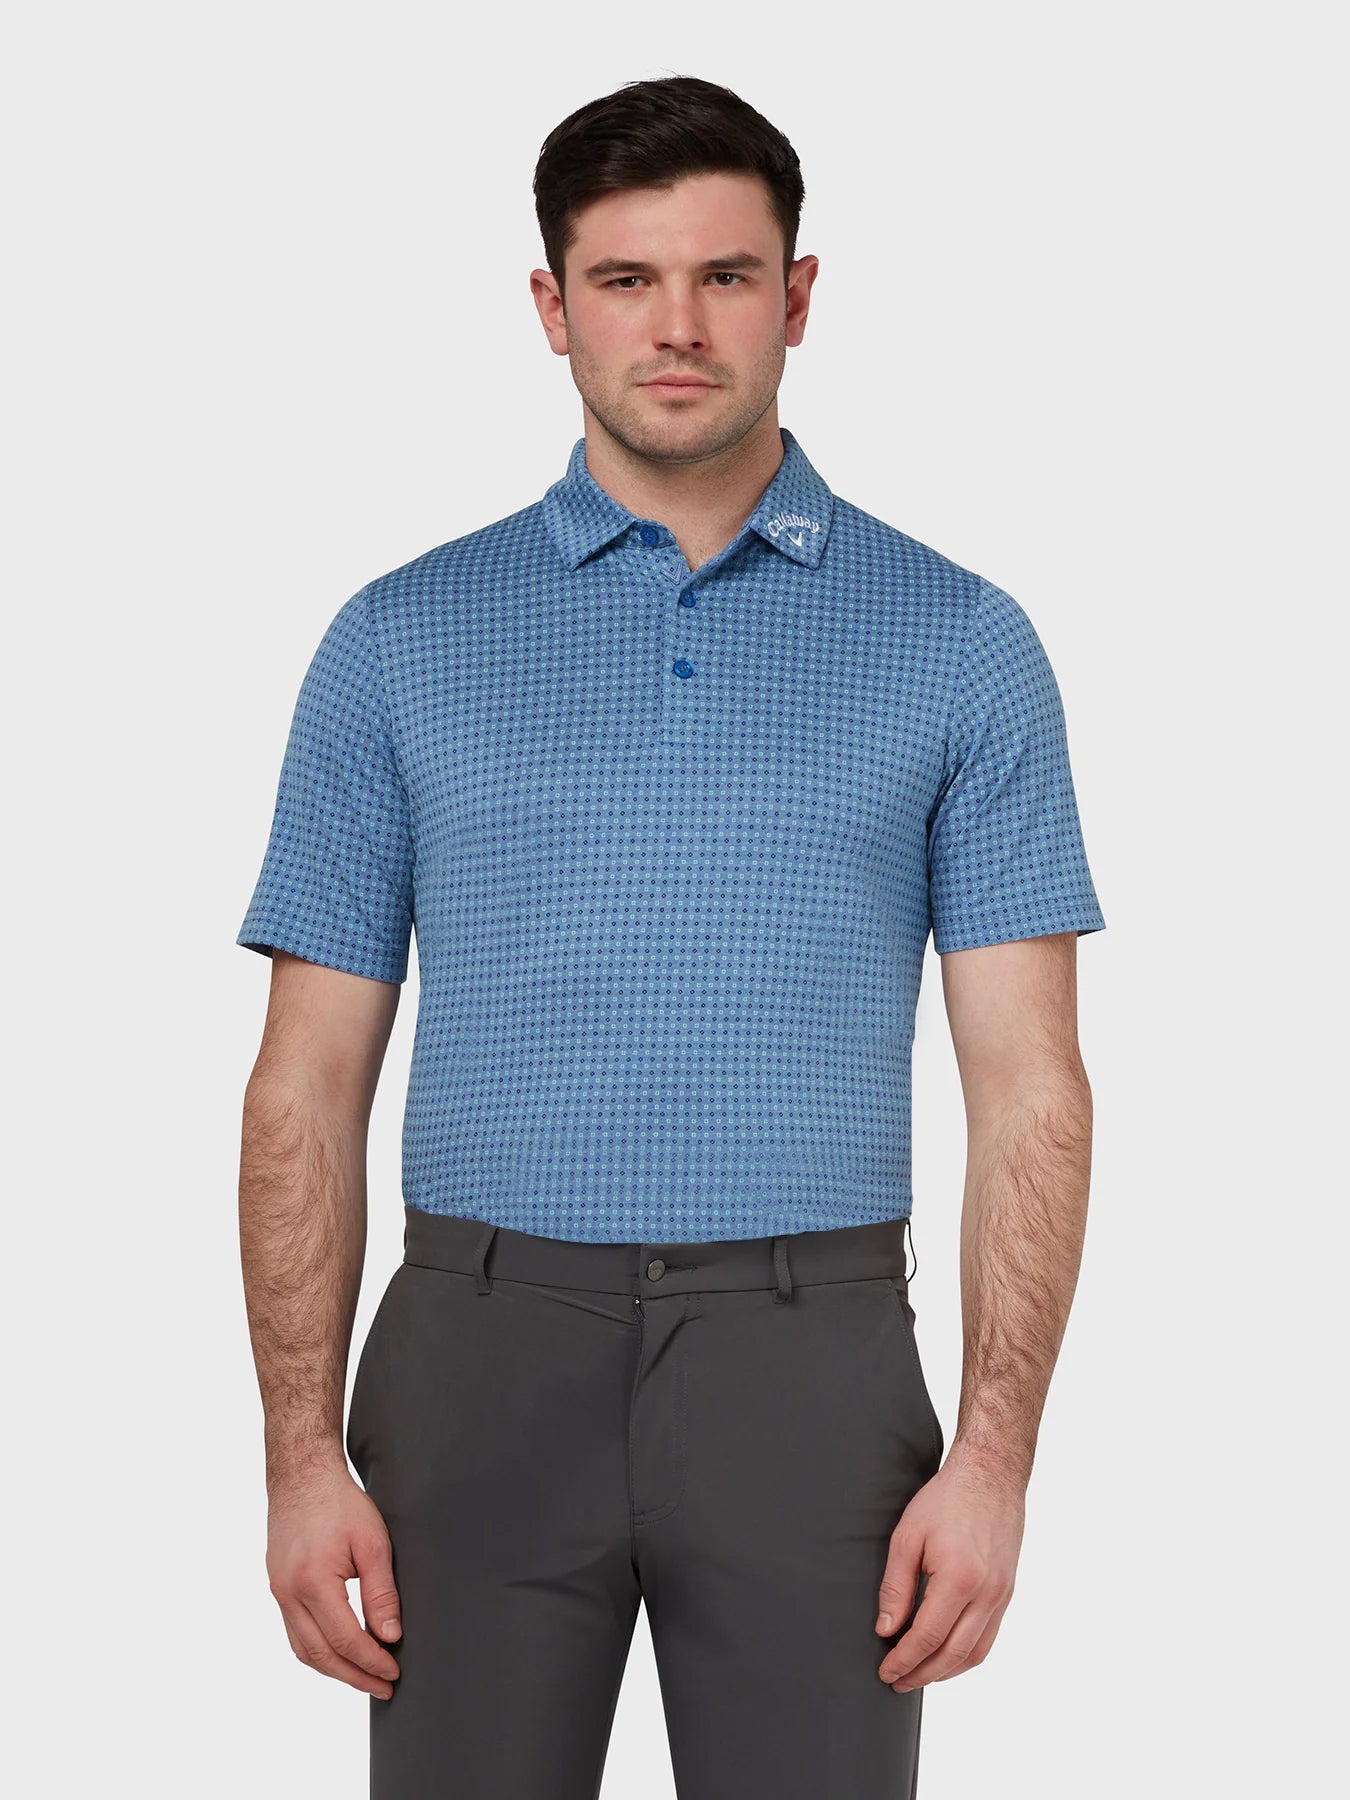 View Soft Touch Micro Print Polo In Magnetic Blue Heather Magnetic Blue Heather XL information